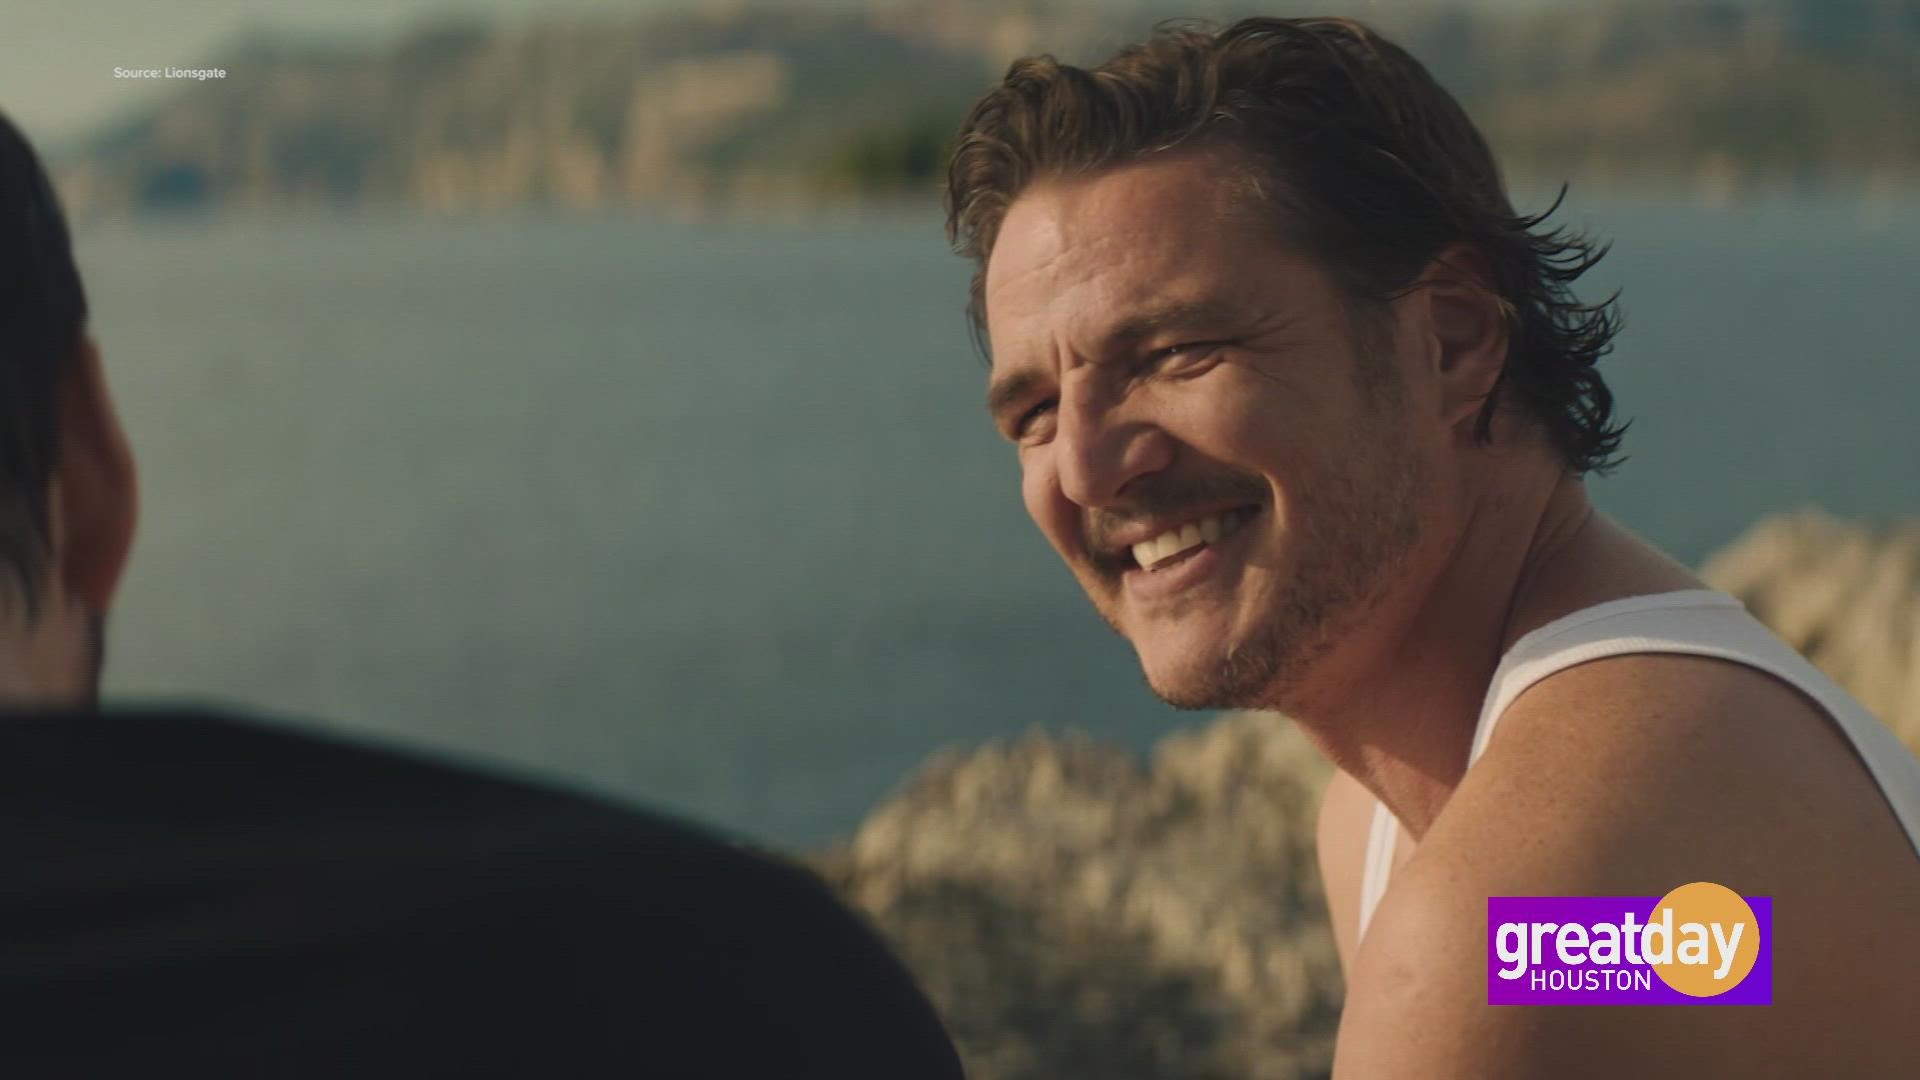 Pedro Pascal stars alongside Nicolas Cage in "The Unbearable Weight of Massive Talent"